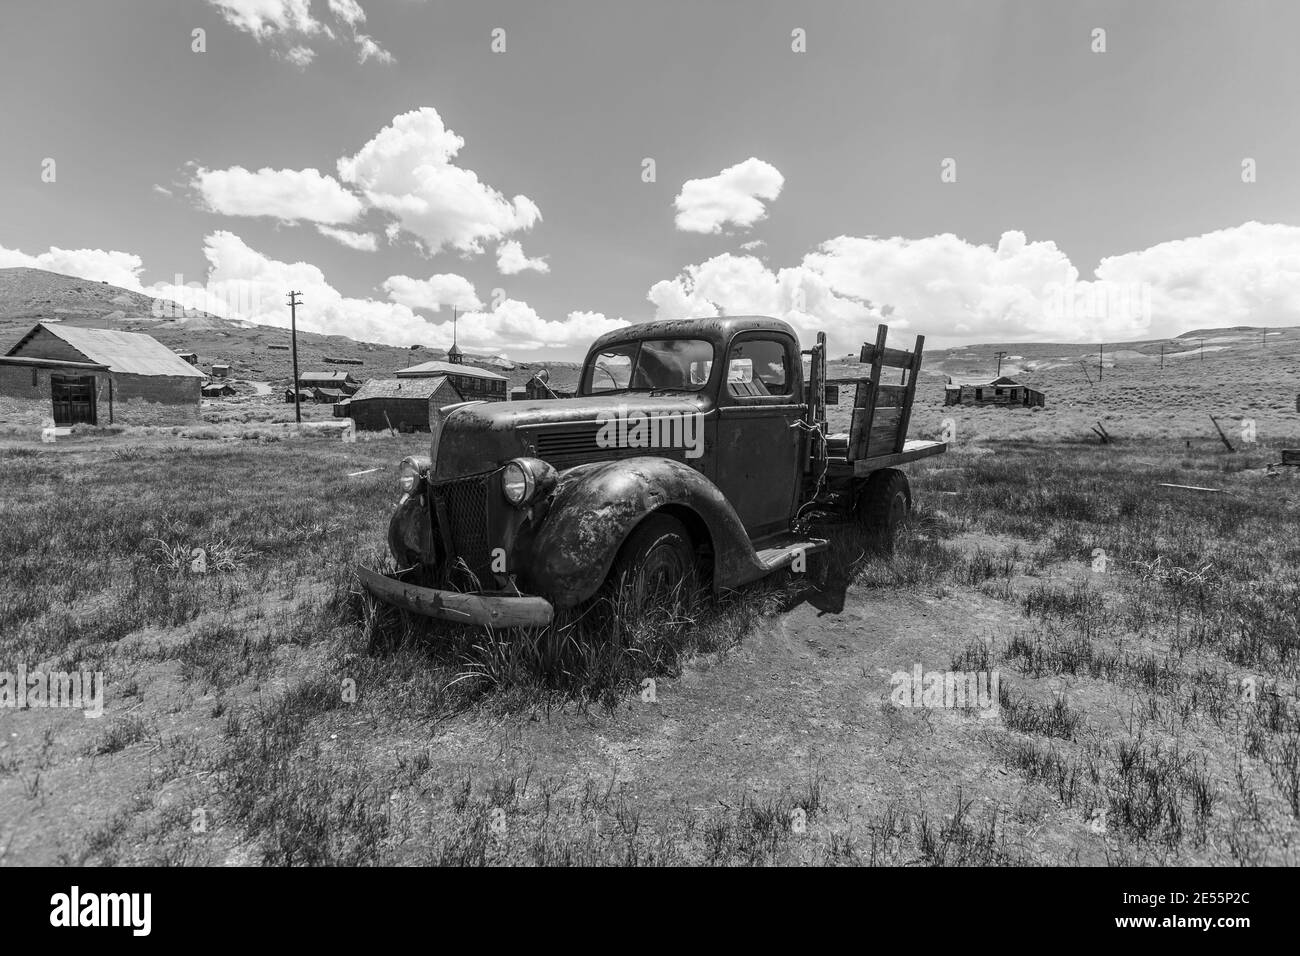 Bodie, California, USA - July 6, 2015:  Abandoned pickup truck in black and white at Bodie State Historic Park near Mammoth Lakes, California. Stock Photo